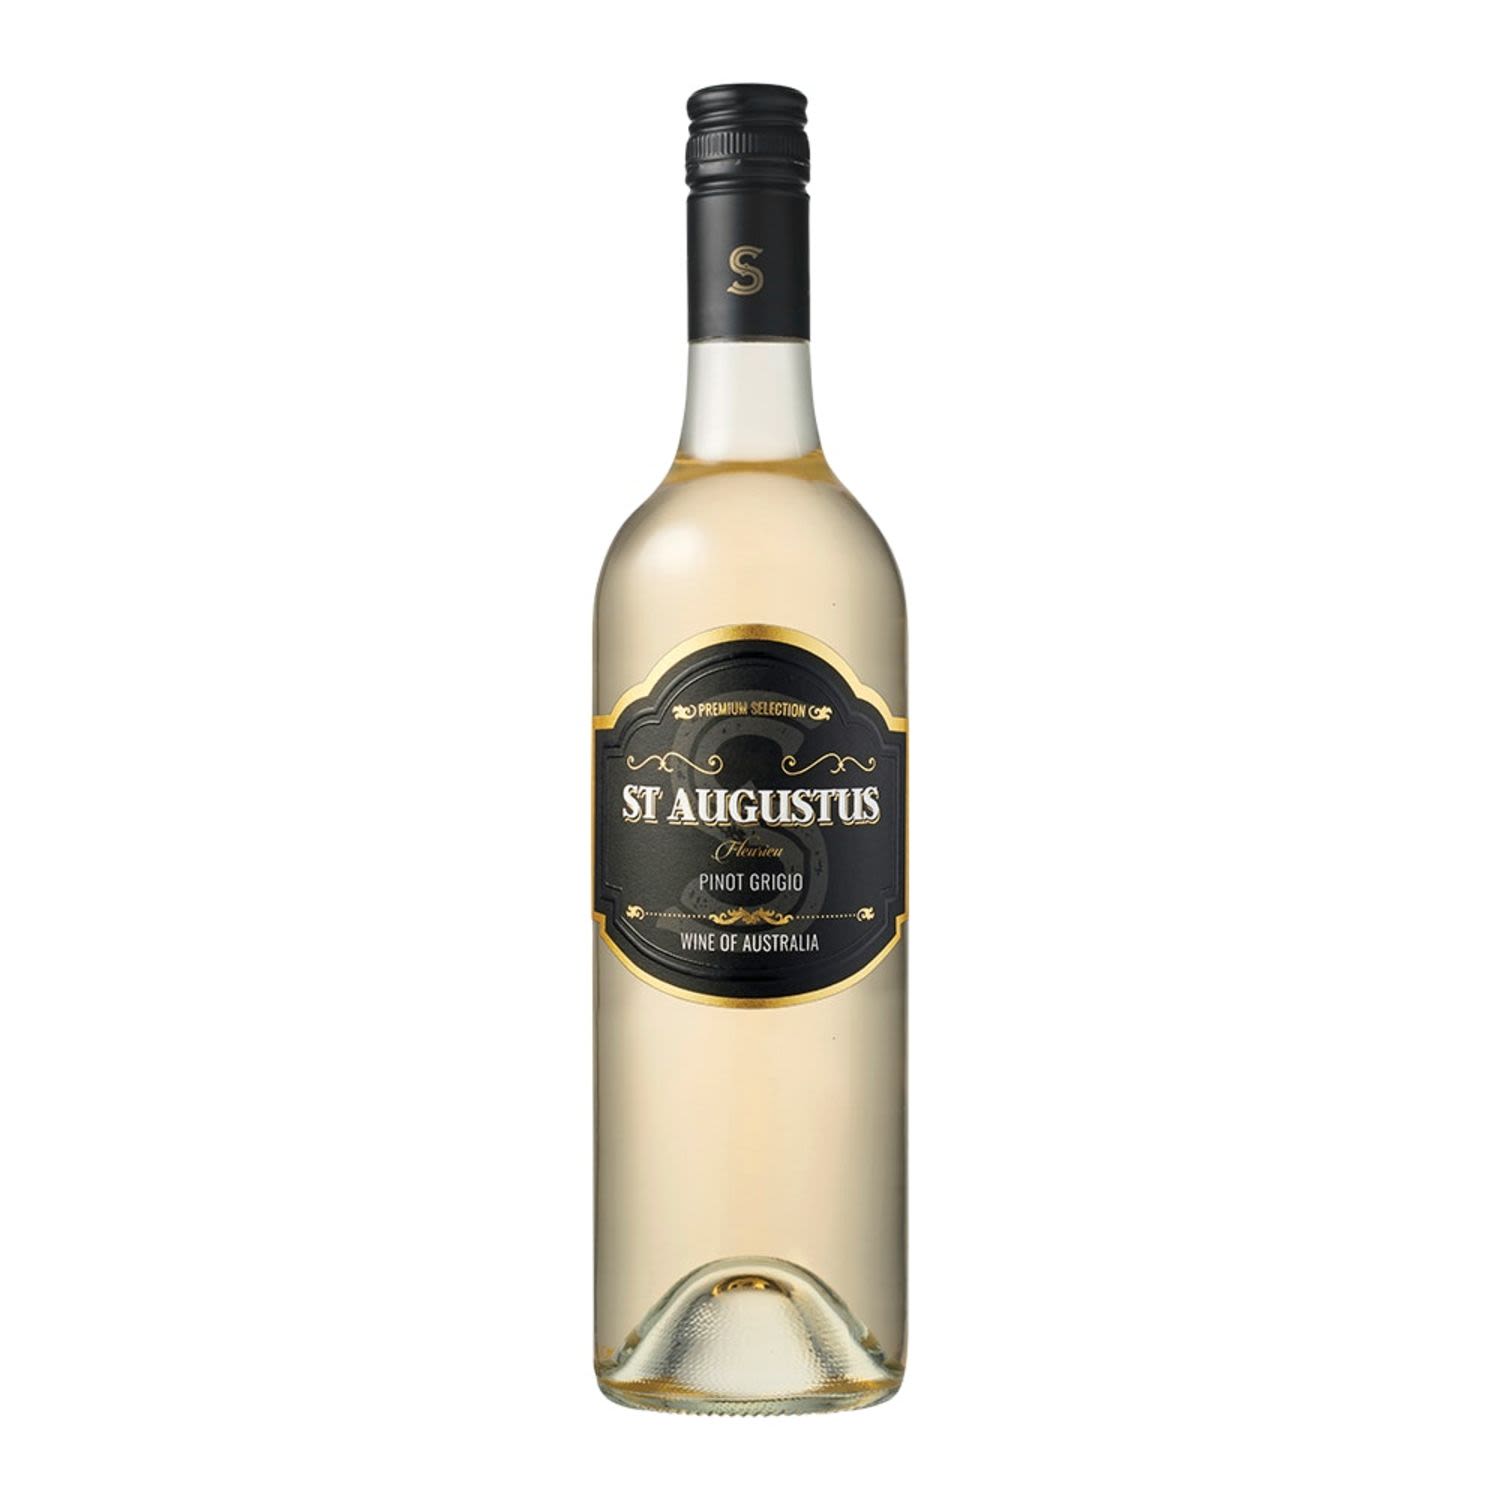 St Augustus Pinot Grigio is a delicious full flavoured white wine, with fragrant melon and citrus fruit and a long finish. Excellent with stir fry and sushi and sashimi dishes.<br /> <br />Alcohol Volume: 13.50%<br /><br />Pack Format: Bottle<br /><br />Standard Drinks: 8</br /><br />Pack Type: Bottle<br /><br />Country of Origin: Australia<br /><br />Region: Fleurieu<br /><br />Vintage: Vintages Vary<br />